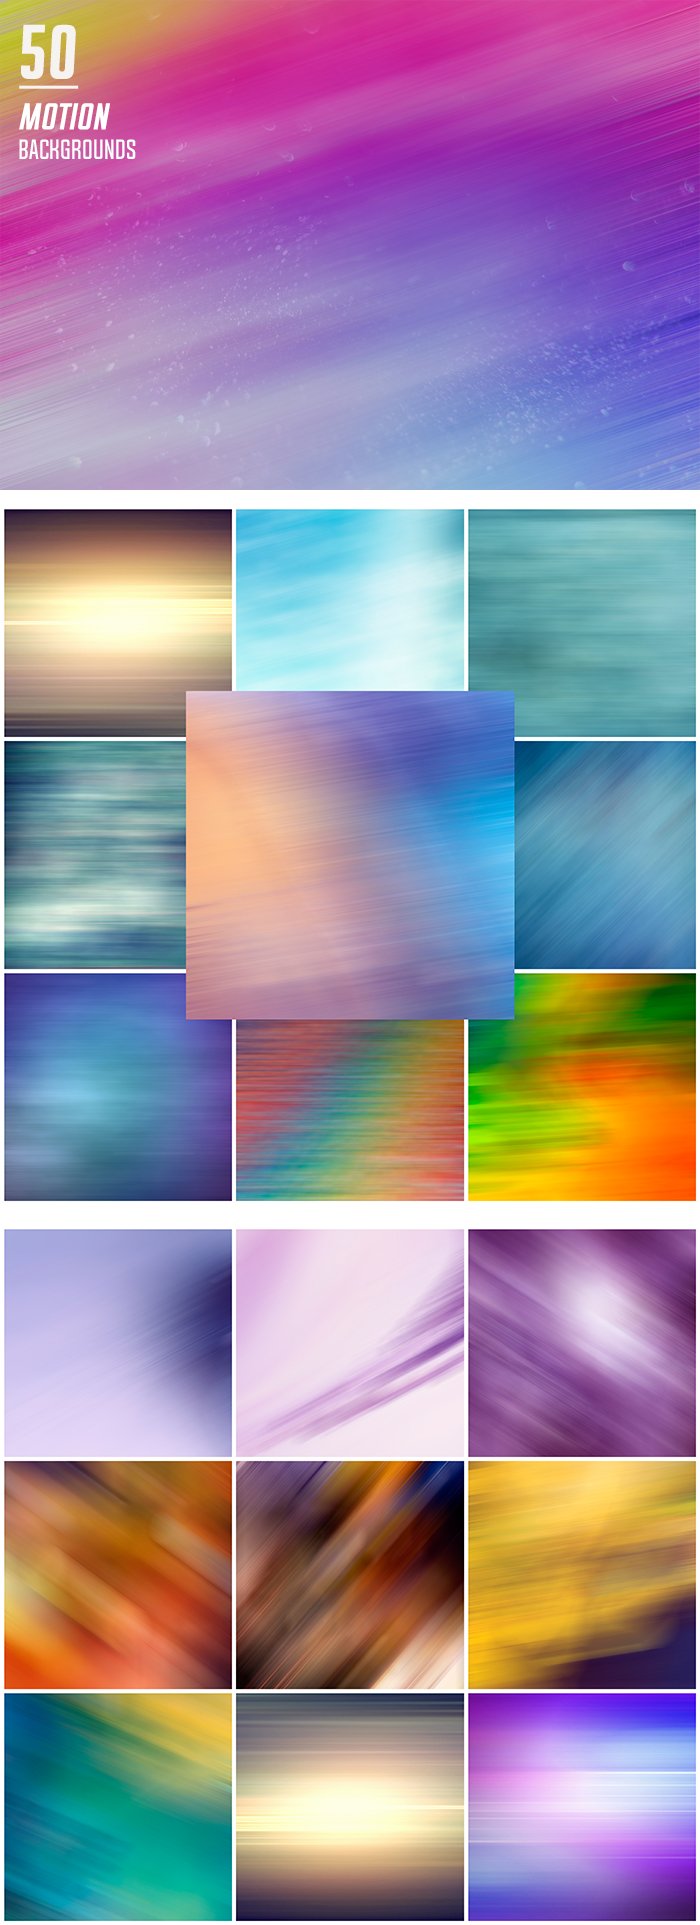  motion effect backgrounds collage